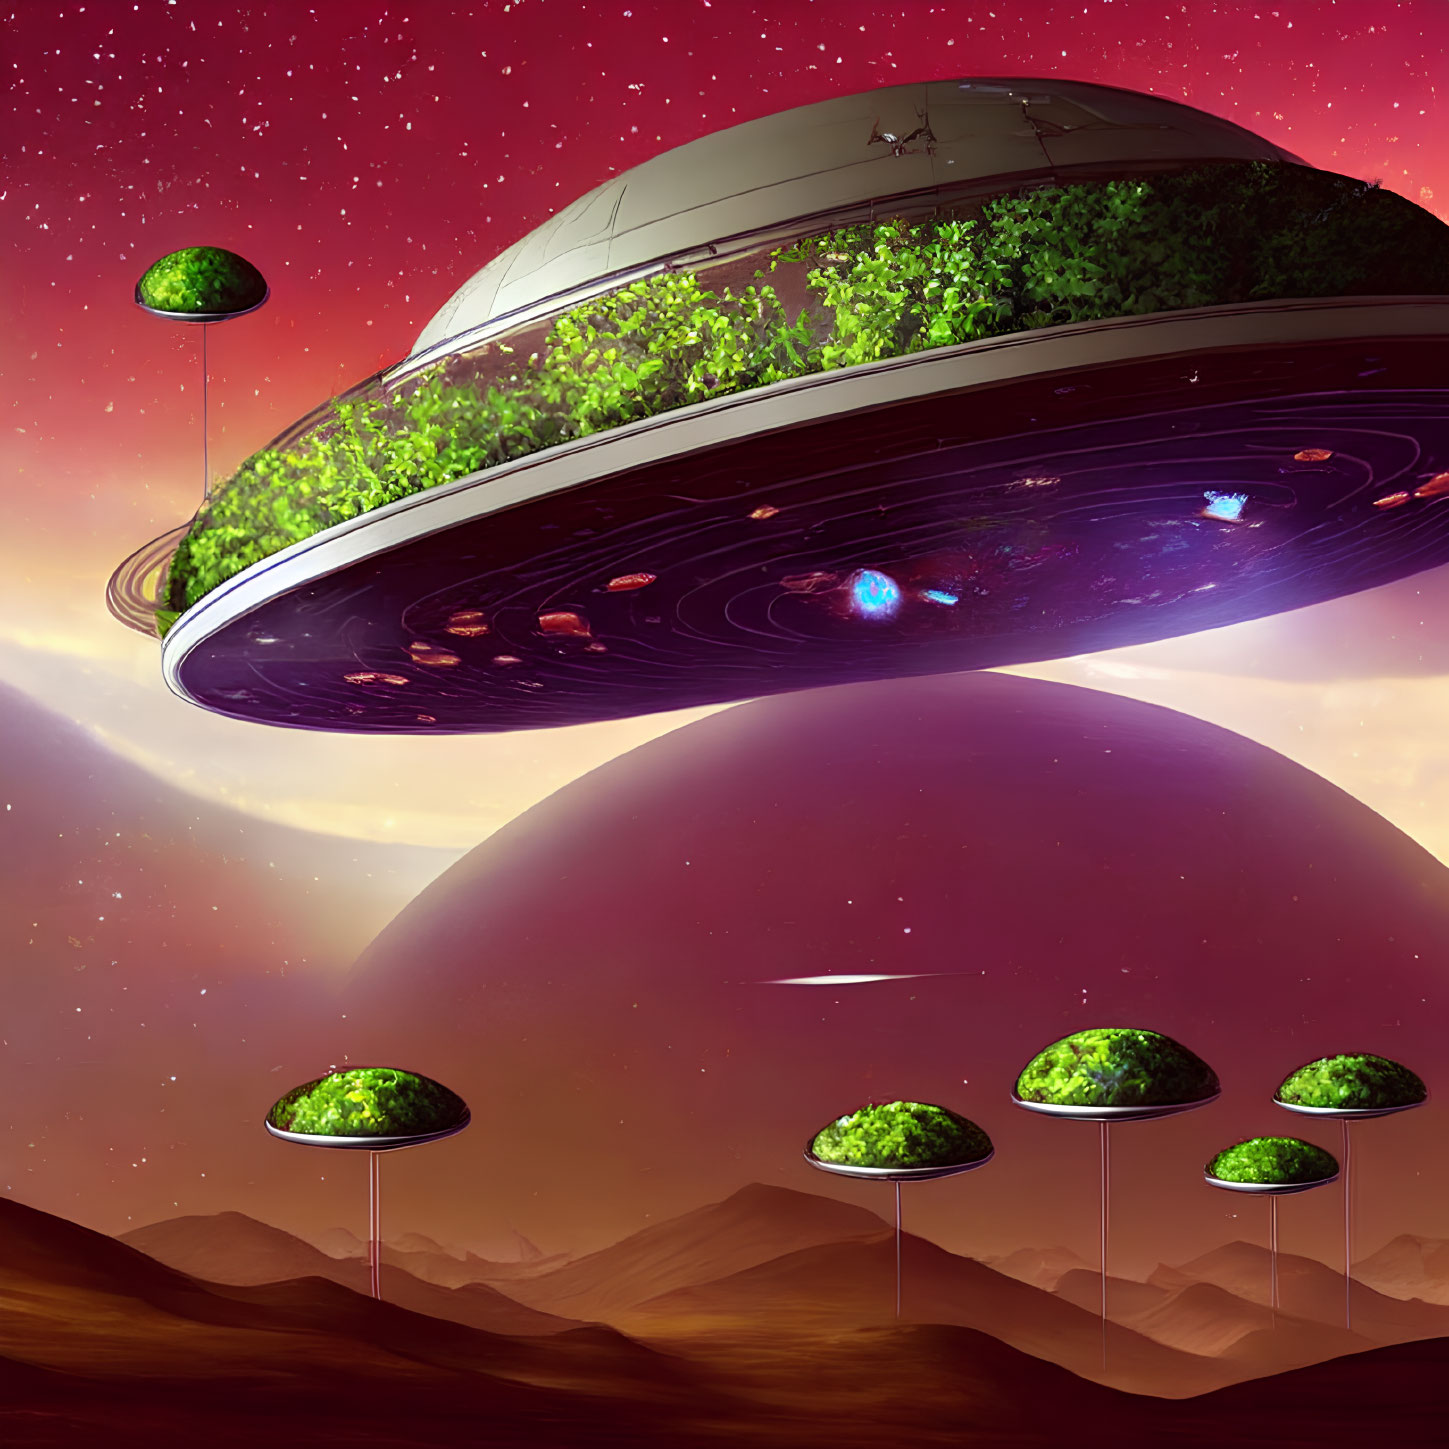 Large hovering UFOs with greenery above desert landscape under reddish sky and distant planet.